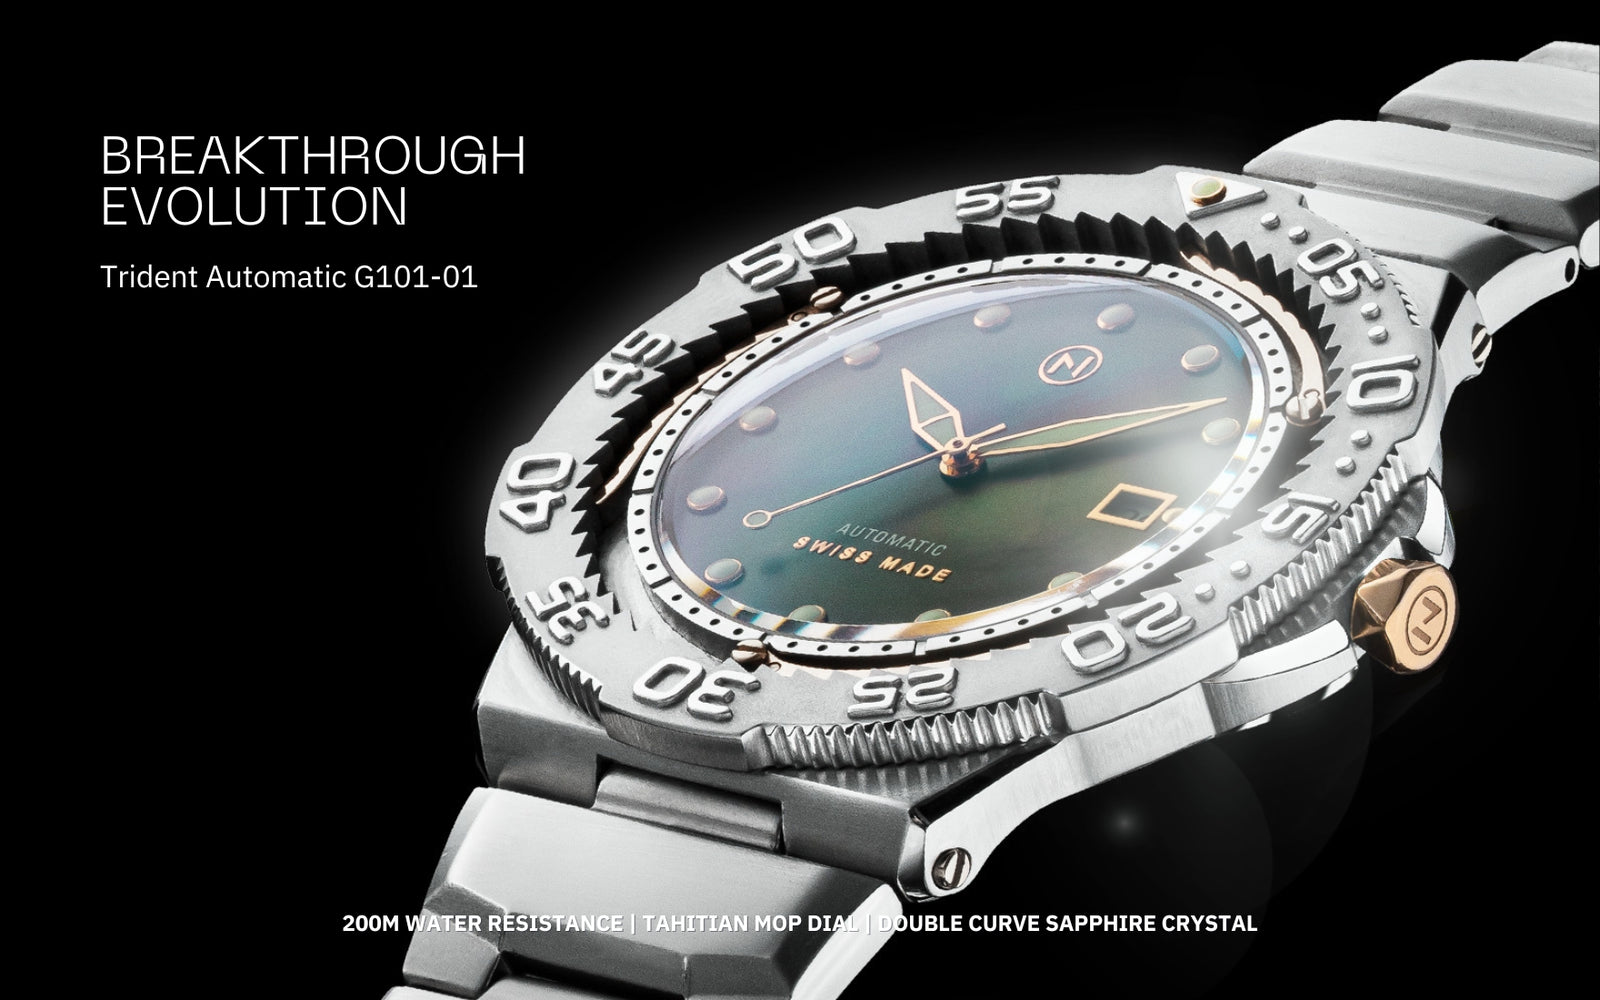 Luxury Swiss Watches, Discover All Our Timepieces